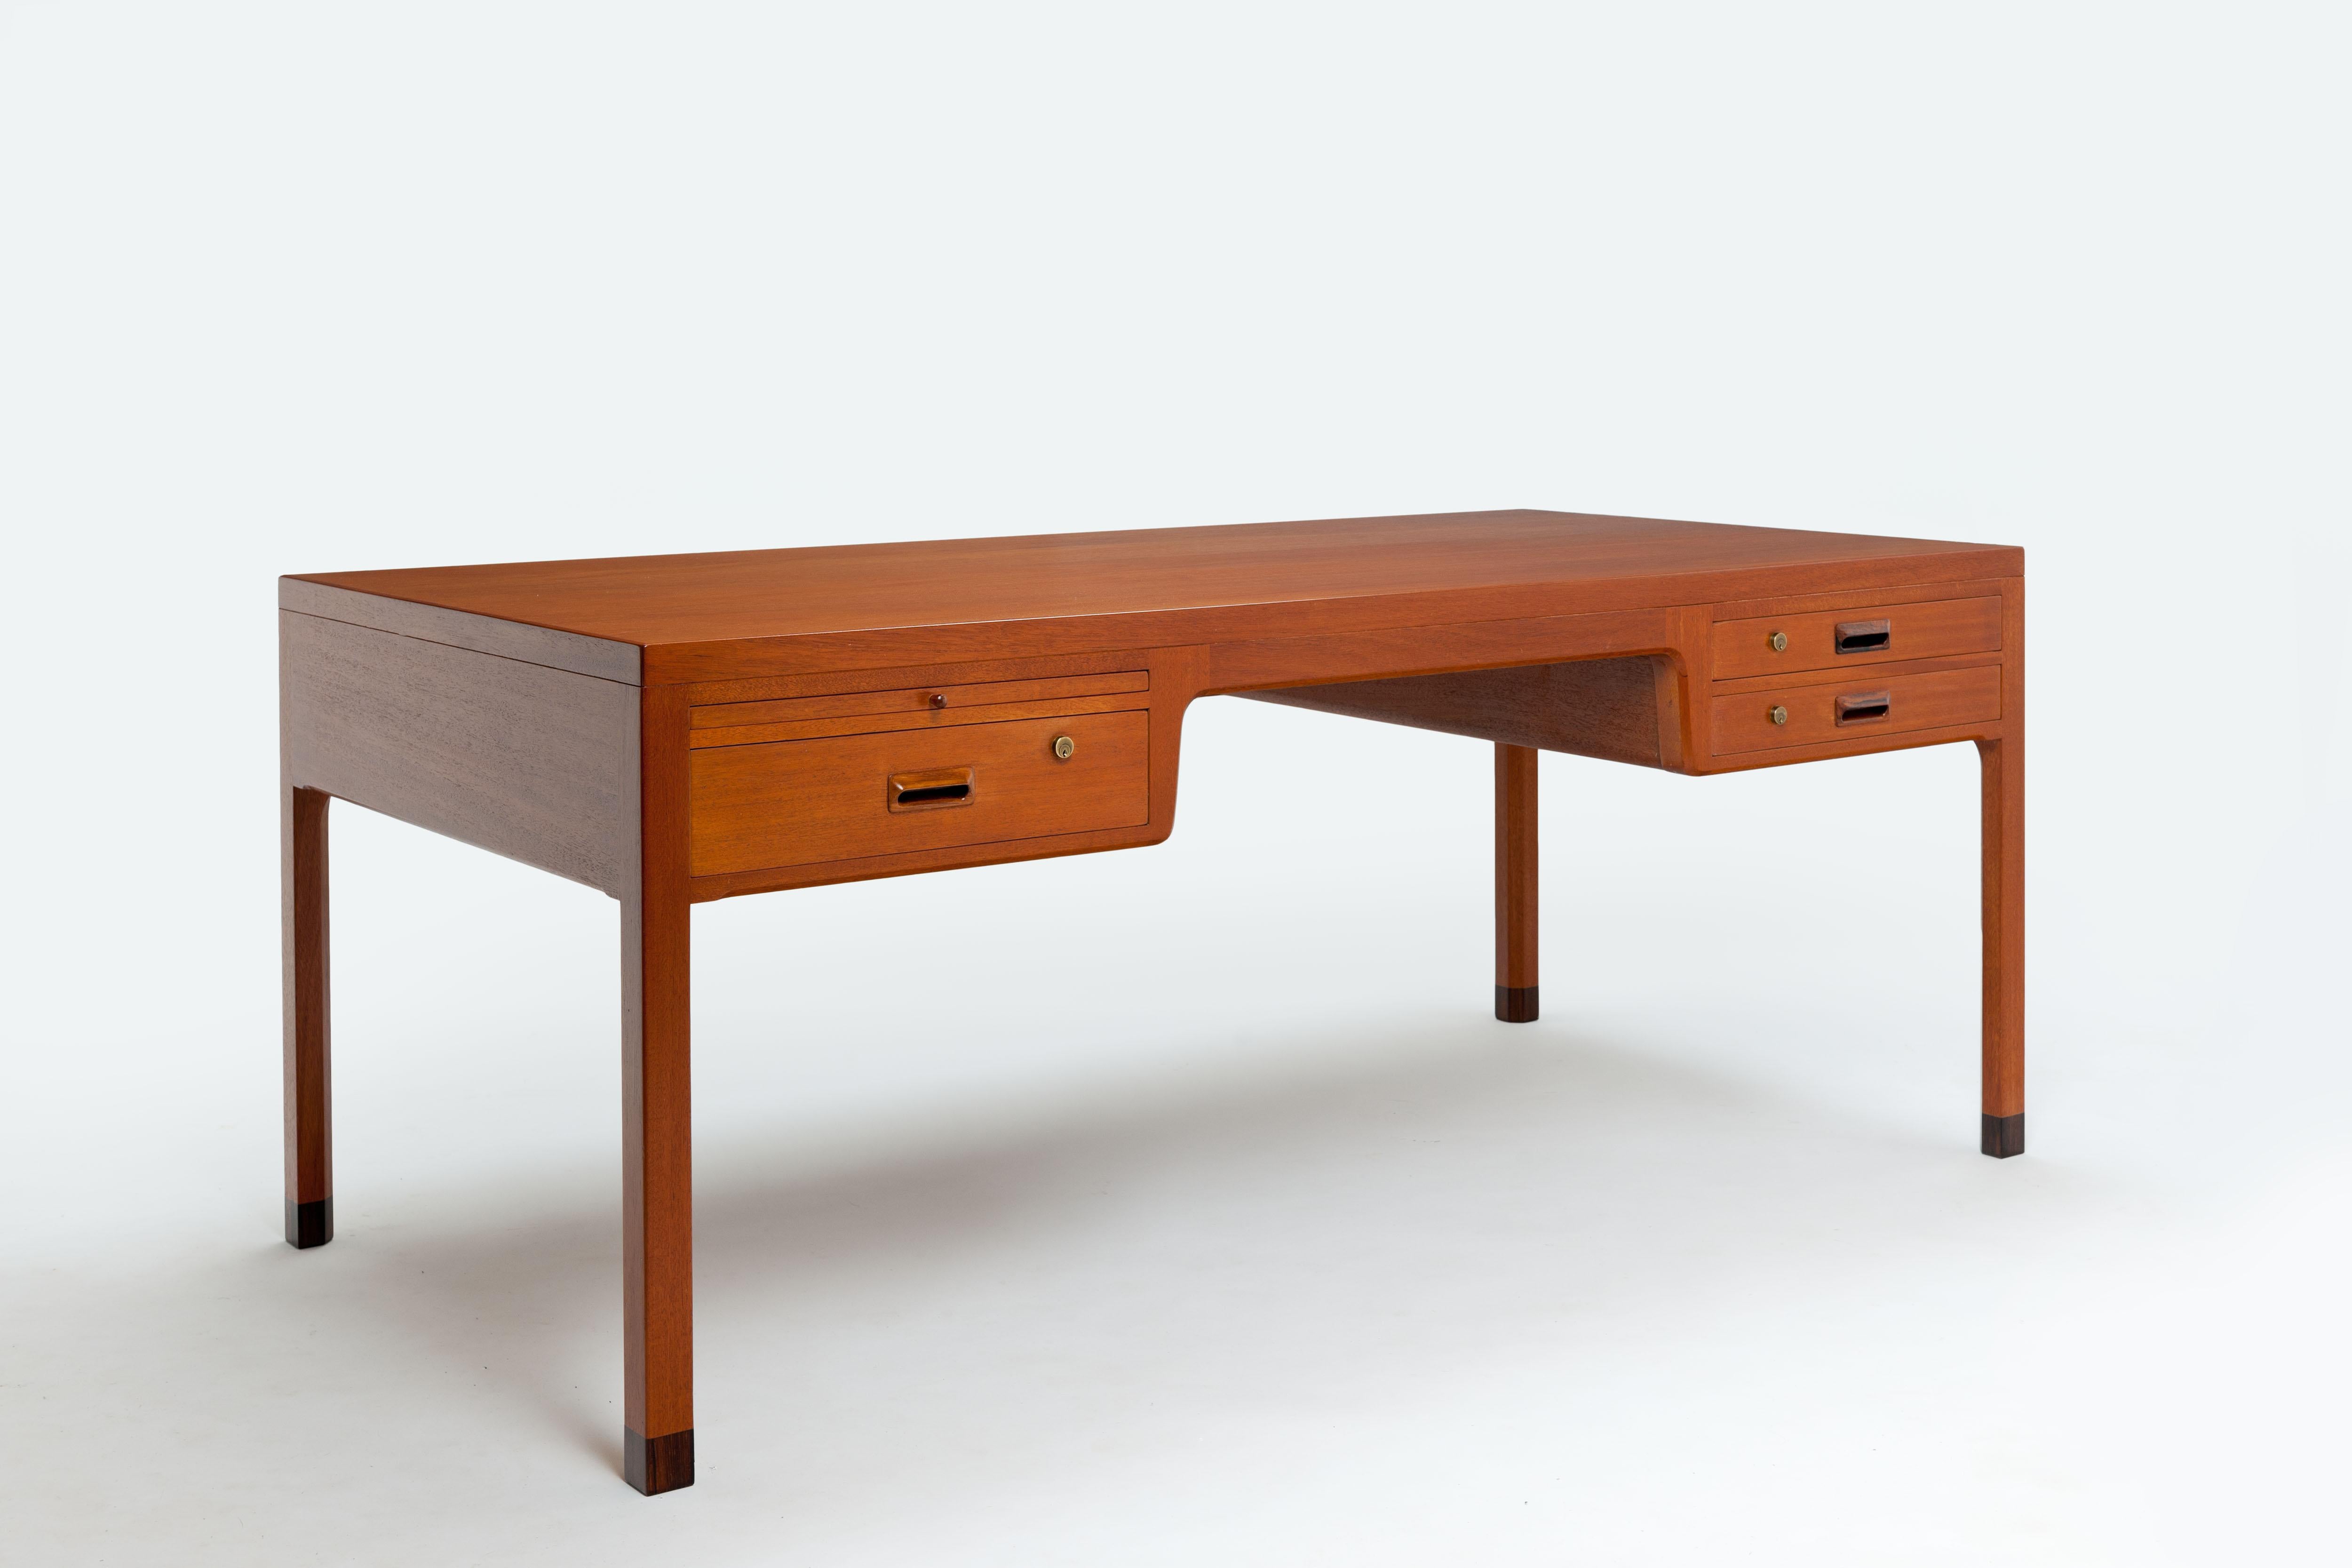 Beautiful distinguished Danish desk, made of mahogany (mainly solid) by Danish designers Ejner Larsen and Aksel Bender Madsen from 1960.
The desk is full of beautiful detailing such as the rejuvenated inside of the legs and the use of a dark